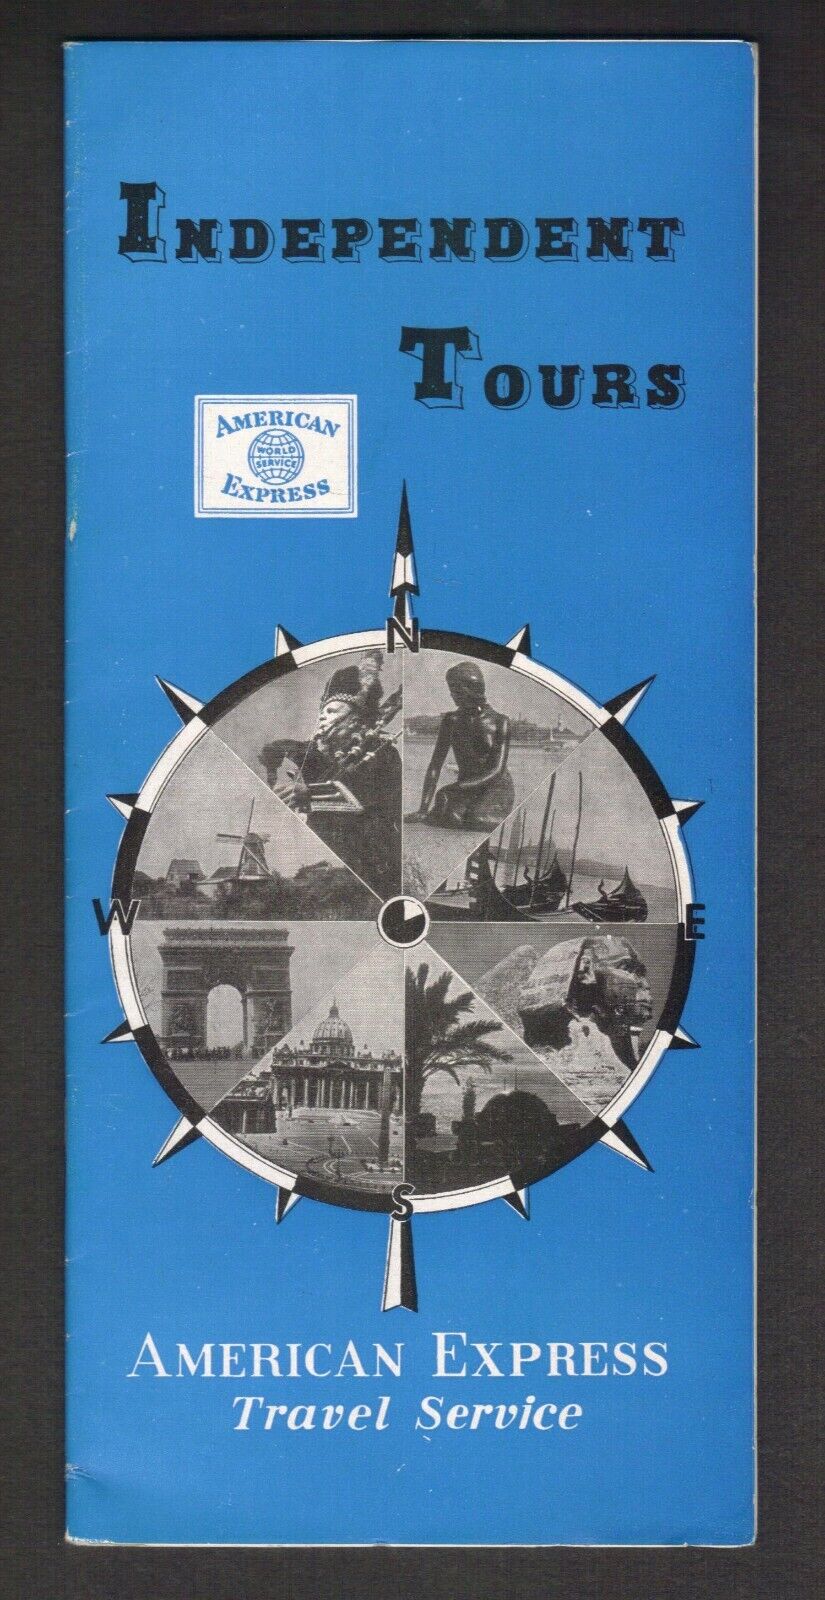 1956 AMERICAN EXPRESS Worldwide Services Independent Tours Travel